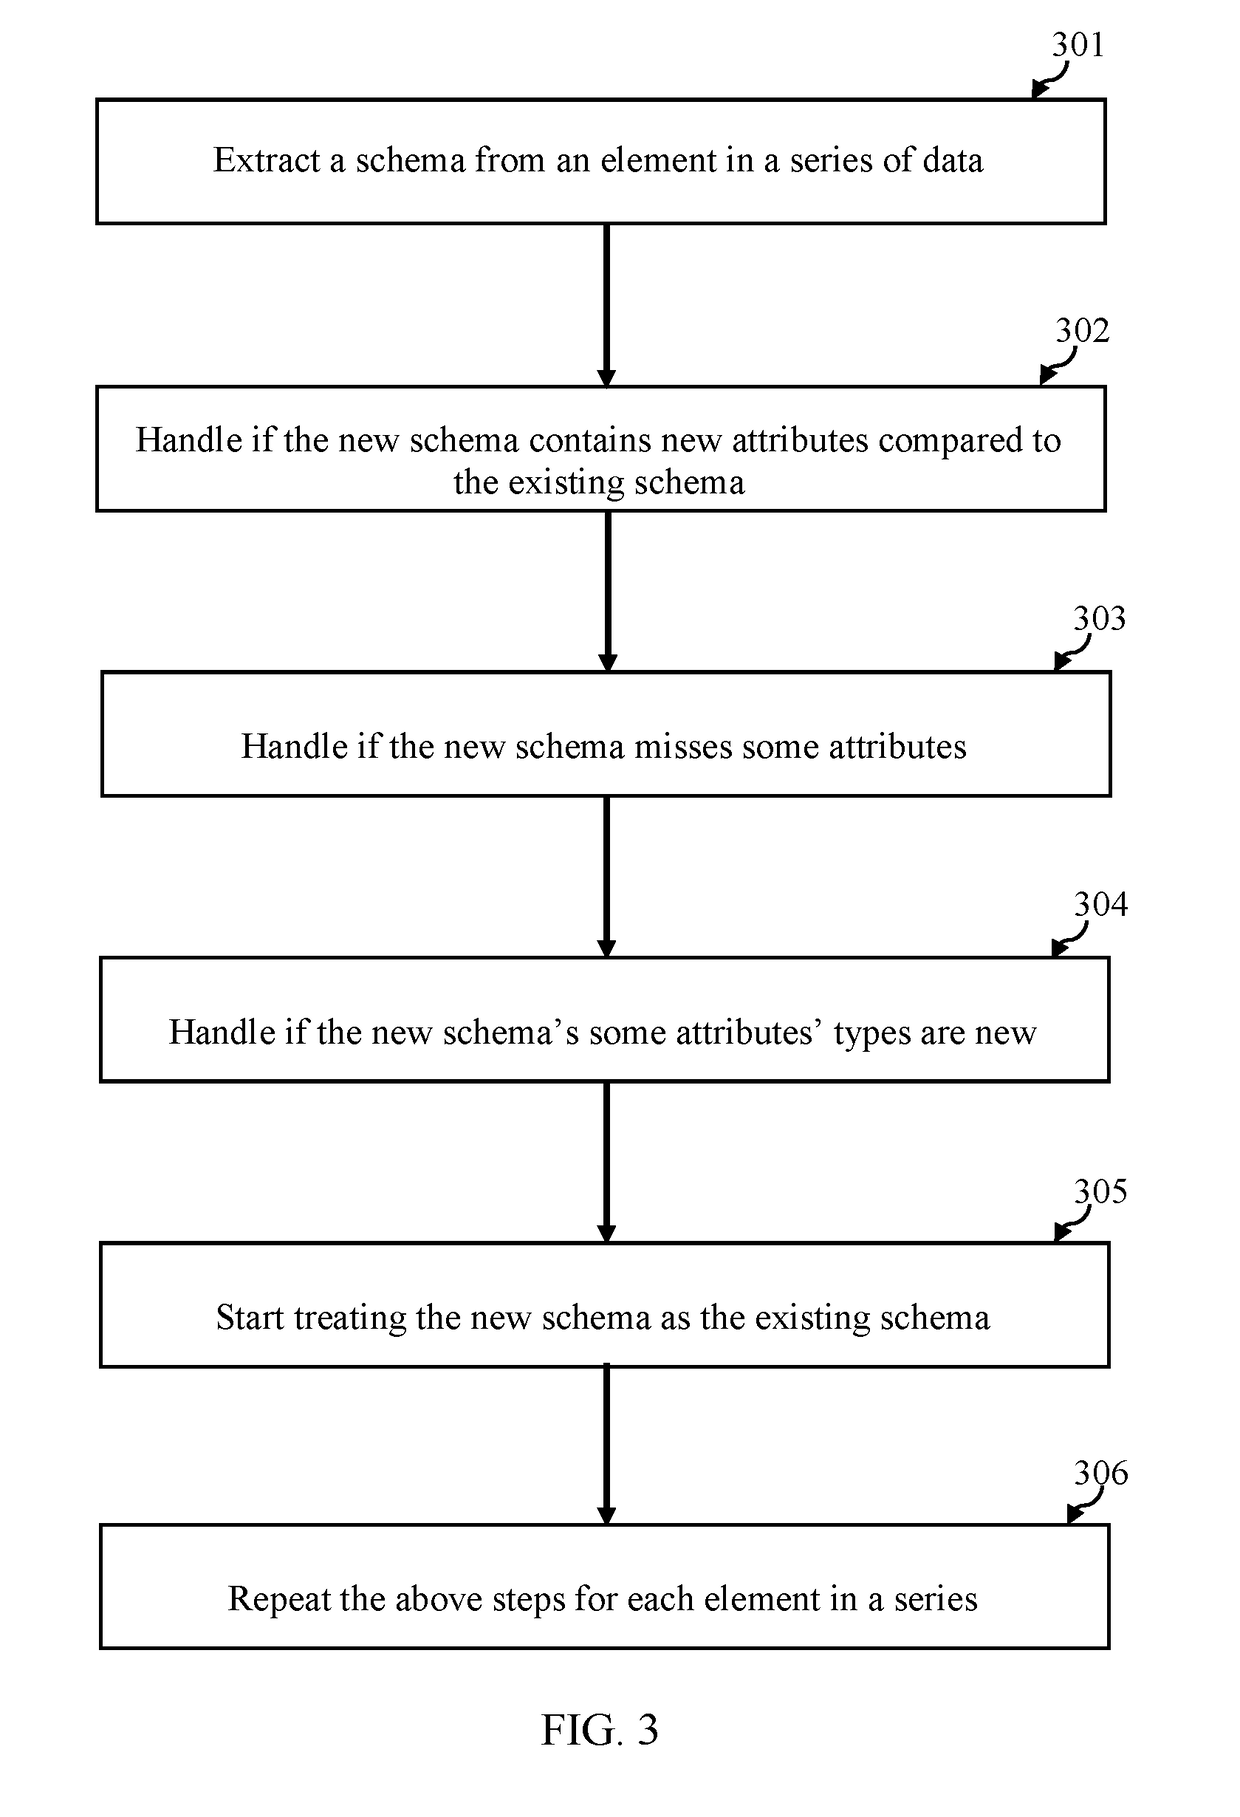 Automated Generation of Data Schemata for Application Programming Interfaces